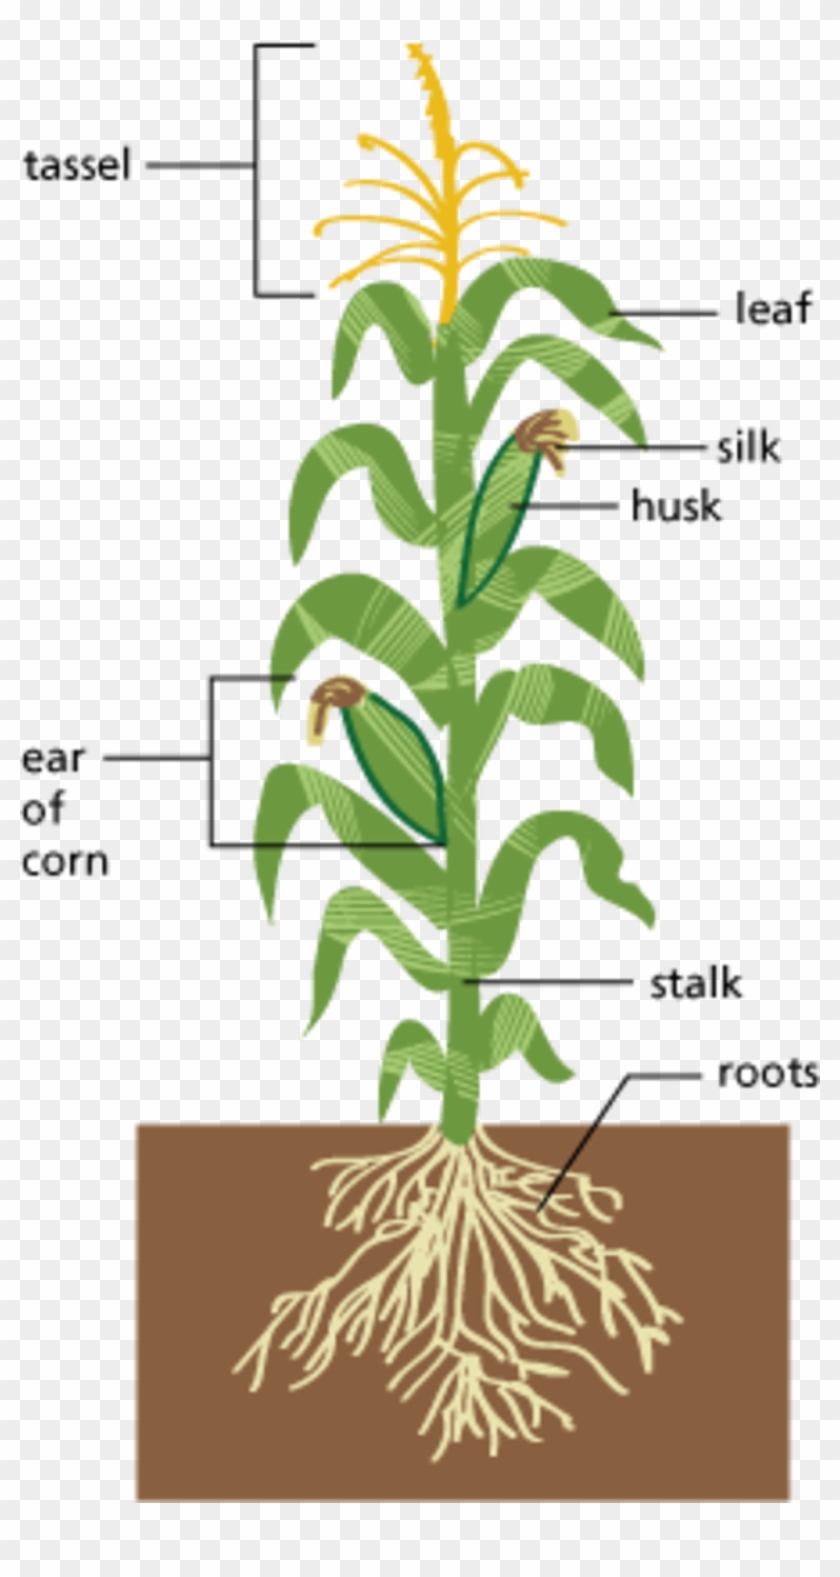 Image Of Edible Parts Of A Plant Diagram Large Size - Parts Of A Corn Plant #850059